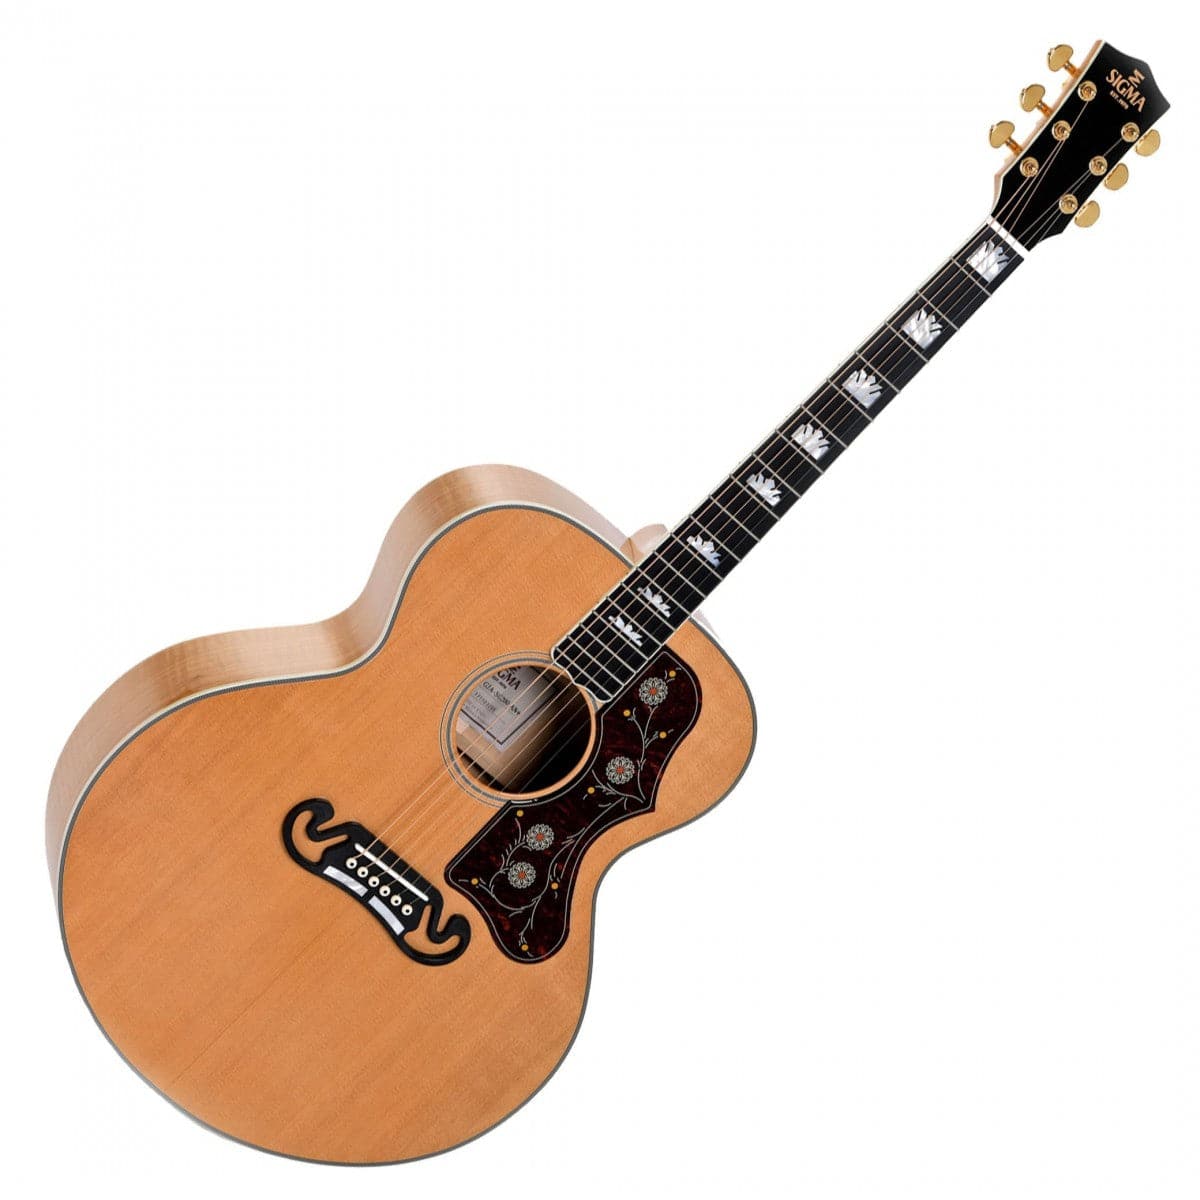 Sigma SG Series GJA-SG200 Jumbo Electro Acoustic Guitar - Antique Natural with Case